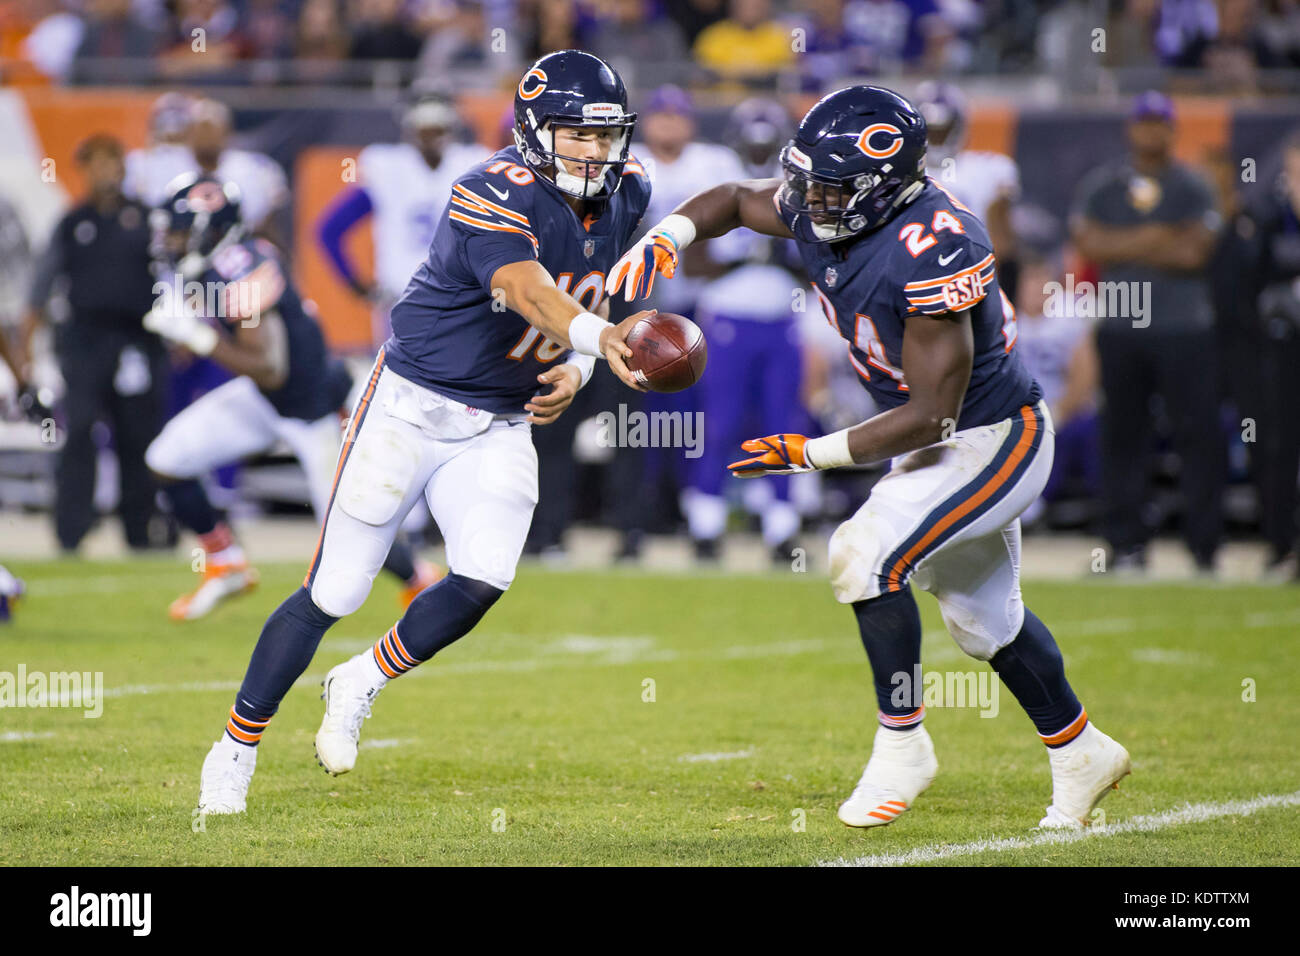 Chicago, Illinois, USA. 09th Oct, 2017. - Bears Quarterback #10 Mitchell Trubisky hands off the ball to #24 Jordan Howard during the NFL Game between the Minnesota Vikings and Chicago Bears at Soldier Field in Chicago, IL. Photographer: Mike Wulf Credit: csm/Alamy Live News Stock Photo